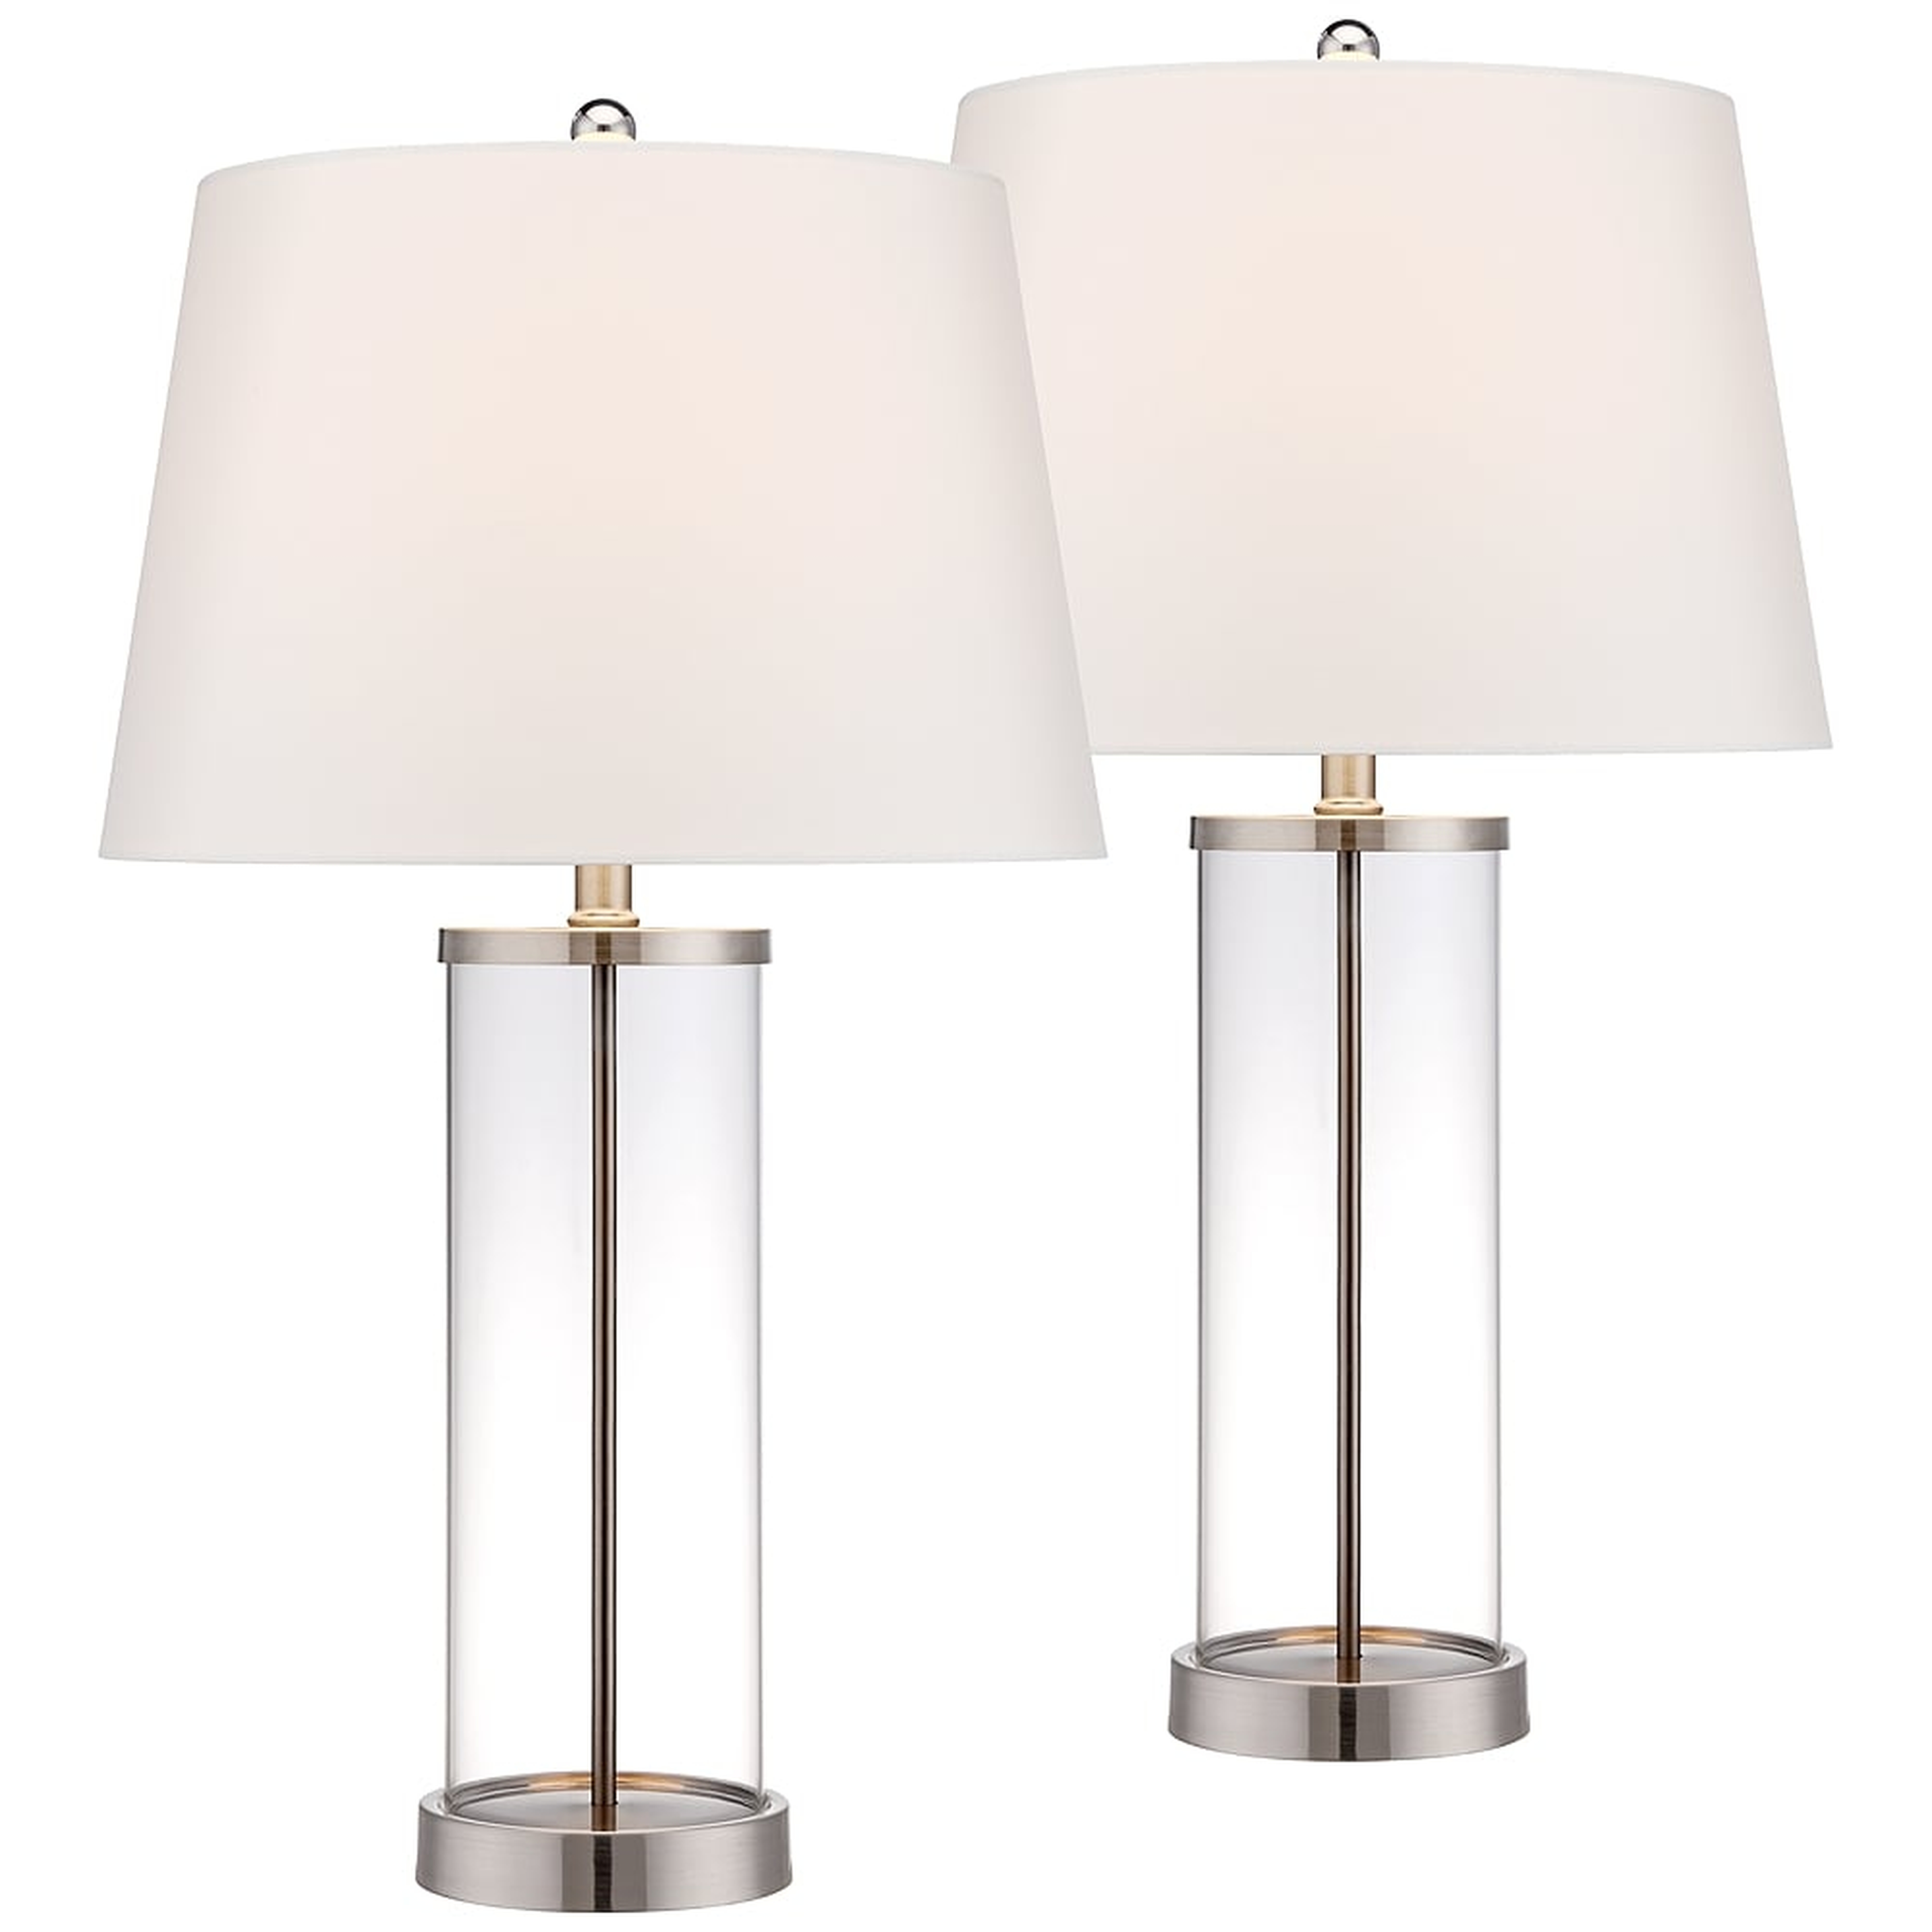 Glass and Steel Cylinder Fillable Table Lamp Set of 2 - Style # 17T87 - Lamps Plus